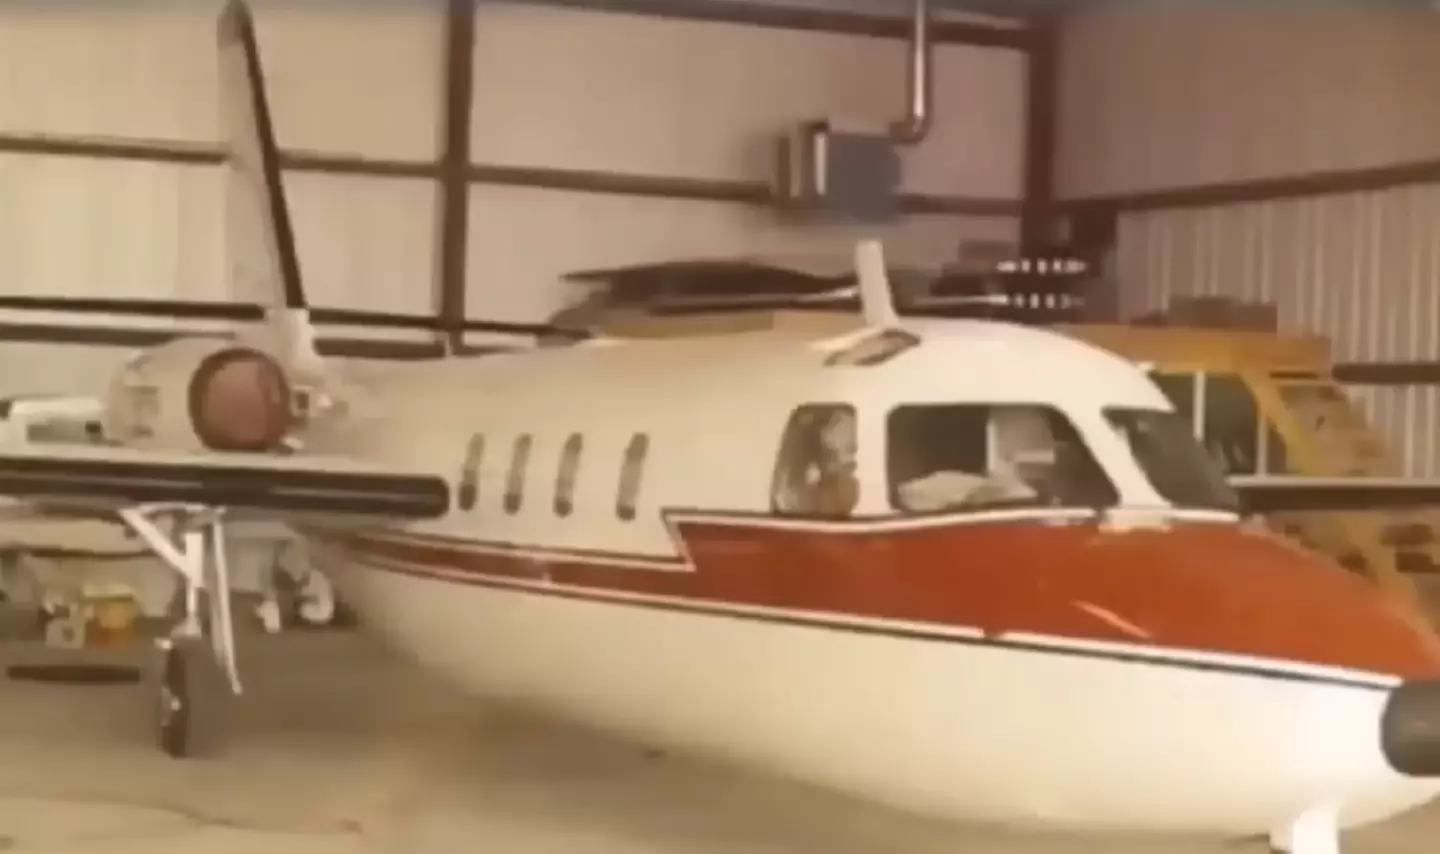 This plane went missing in 1971 with five people on board. (NBC Boston)